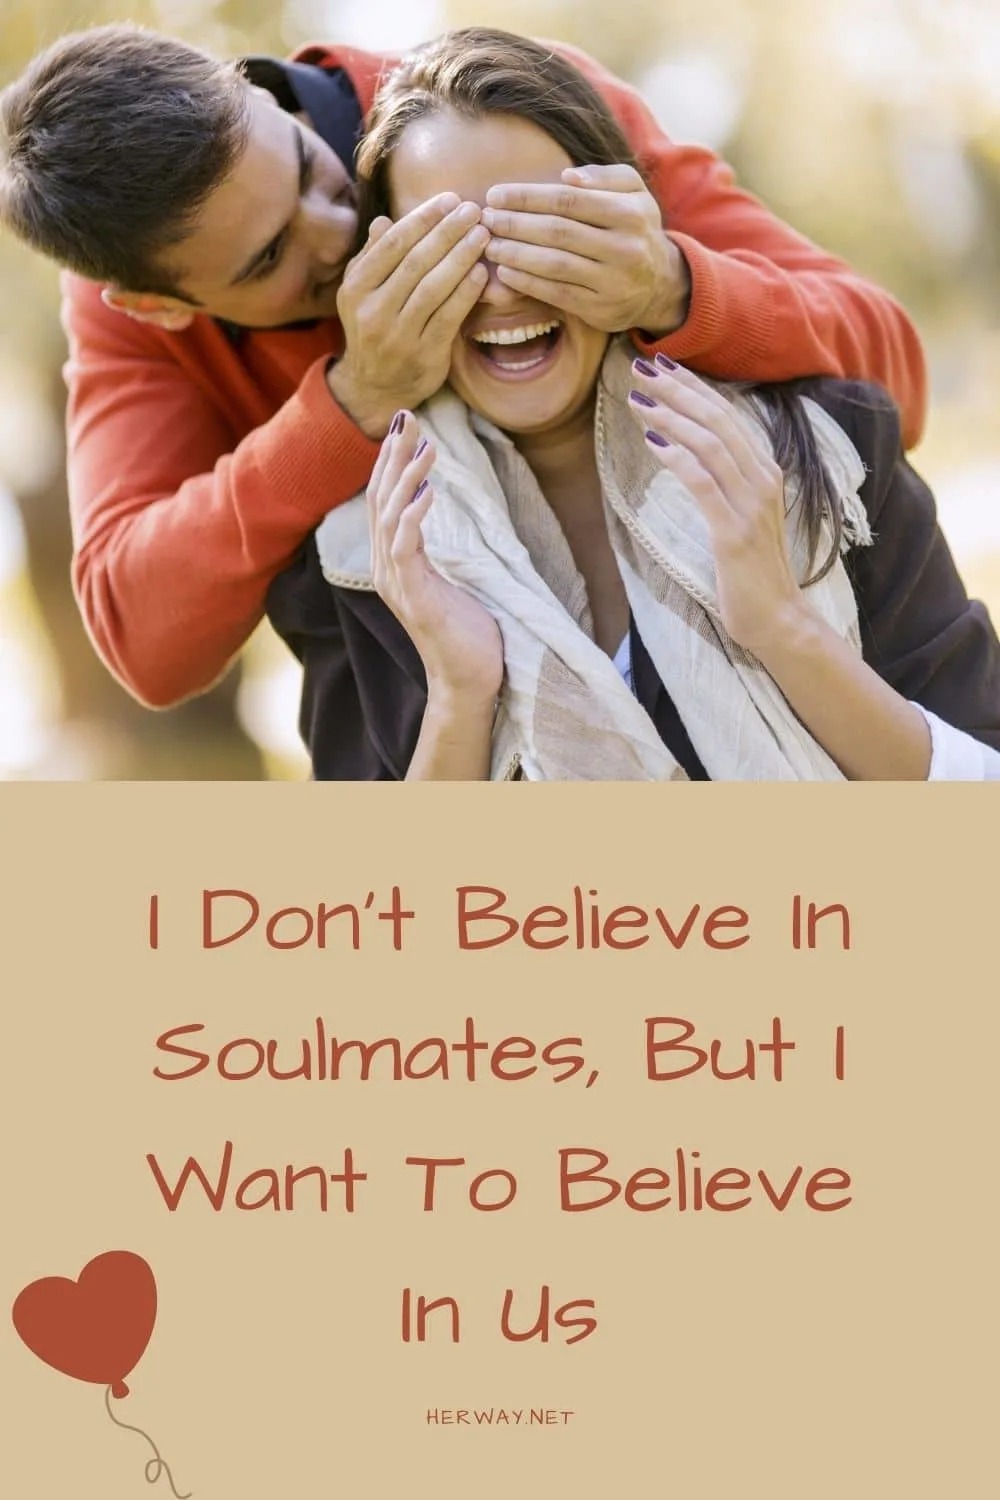 I Don't Believe In Soulmates, But I Want To Believe In Us